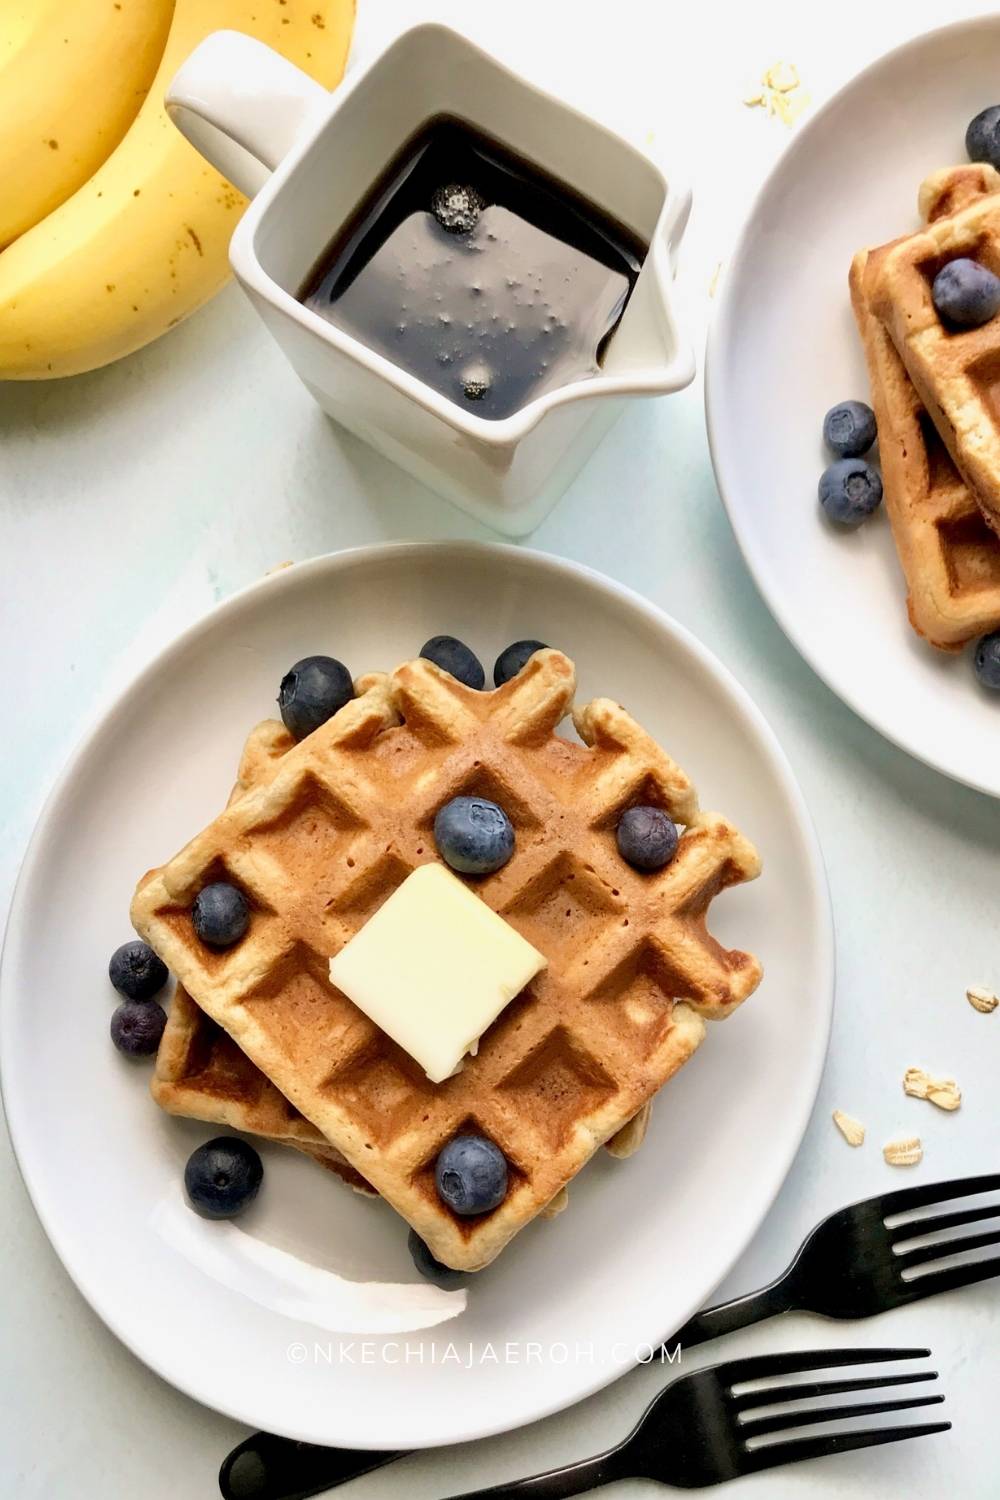 These healthy banana oat waffles are gluten-free, nut-free, fluffy, and the sweetest gluten-free waffles you will ever make! If you have some overripe bananas and old-fashioned oats, let's make some sweet banana oatmeal waffles. If you like bananas and oats separately, you would like even these banana oat waffles the more! These waffles are gluten-free and freezer-friendly.  #waffles #bananawaffles #glutenfreewaffles #healthywaffles #freezermeals #oatmealwaffles